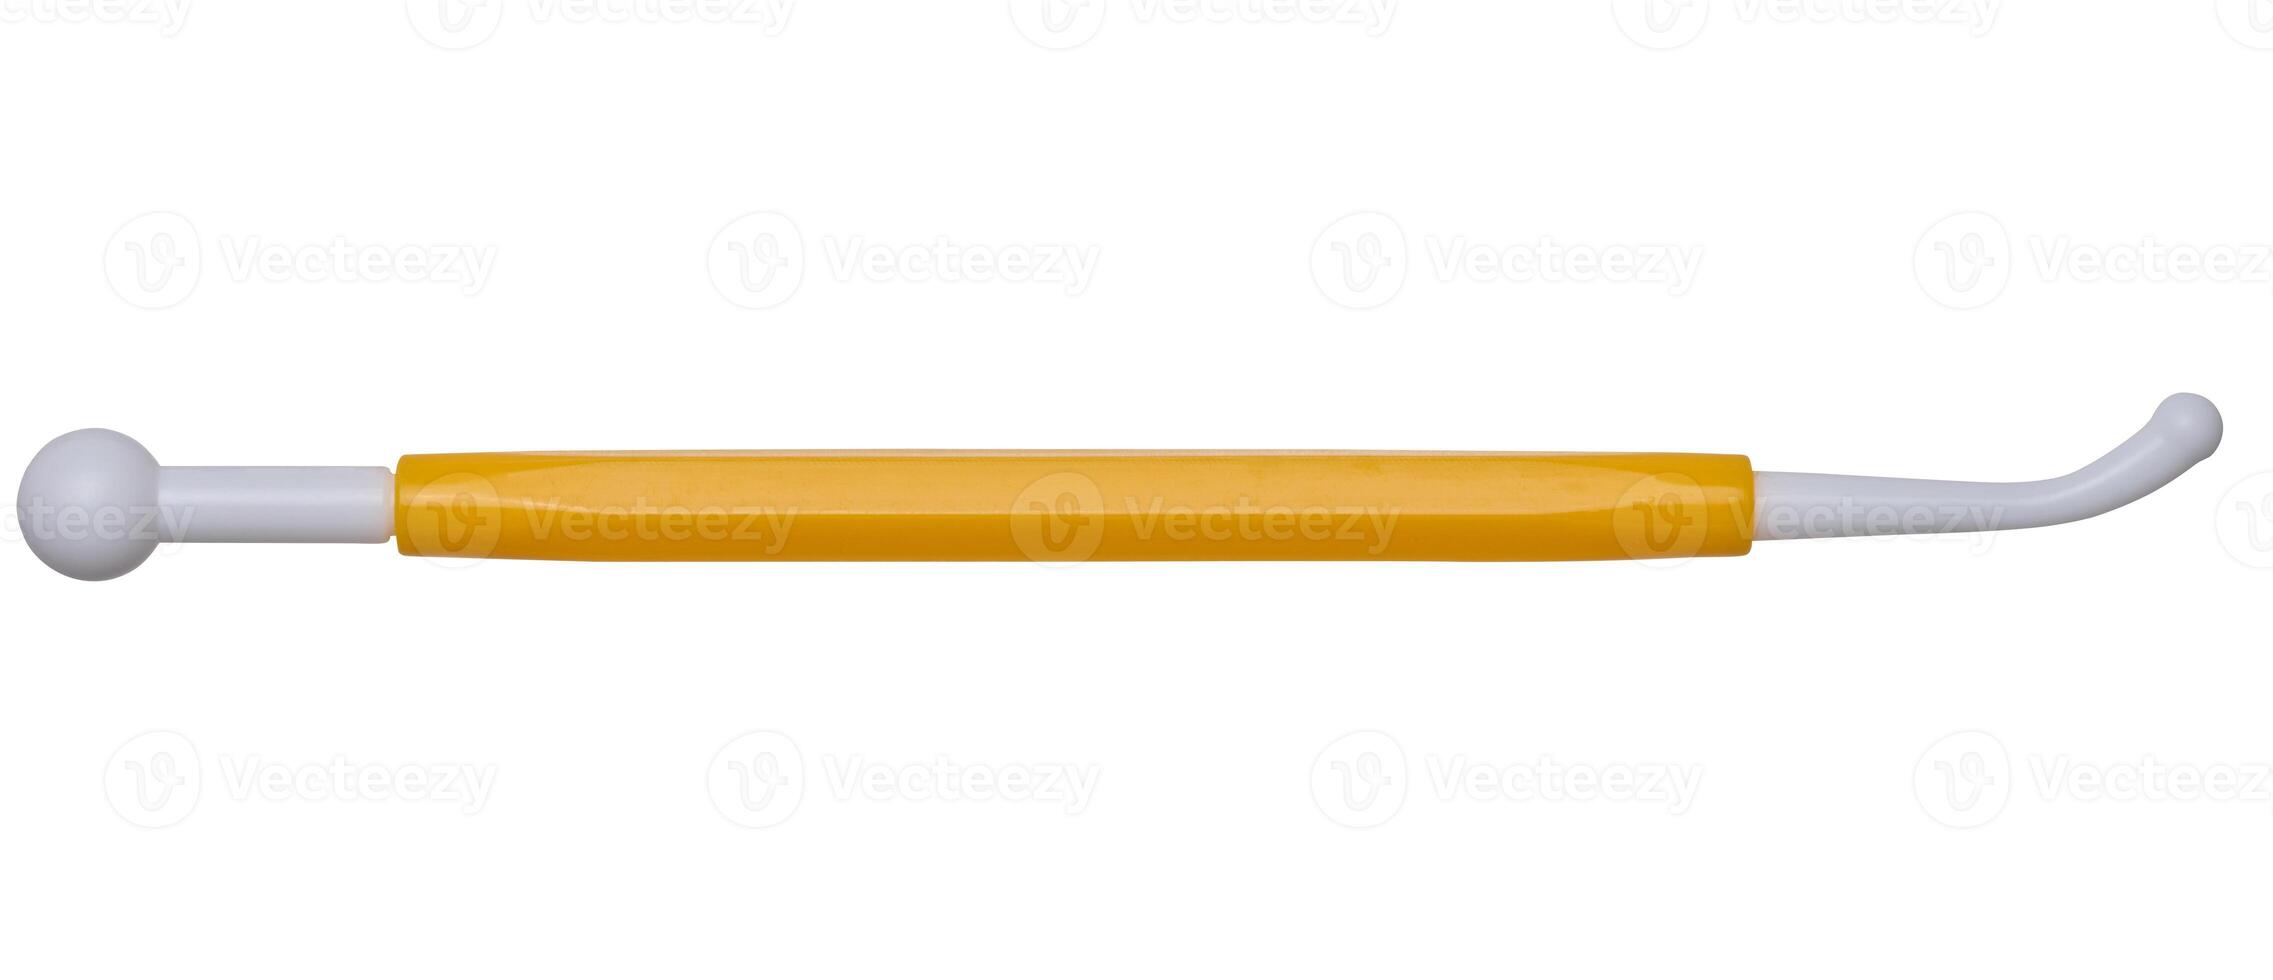 Plastic spatula for modeling plasticine on an isolated background photo